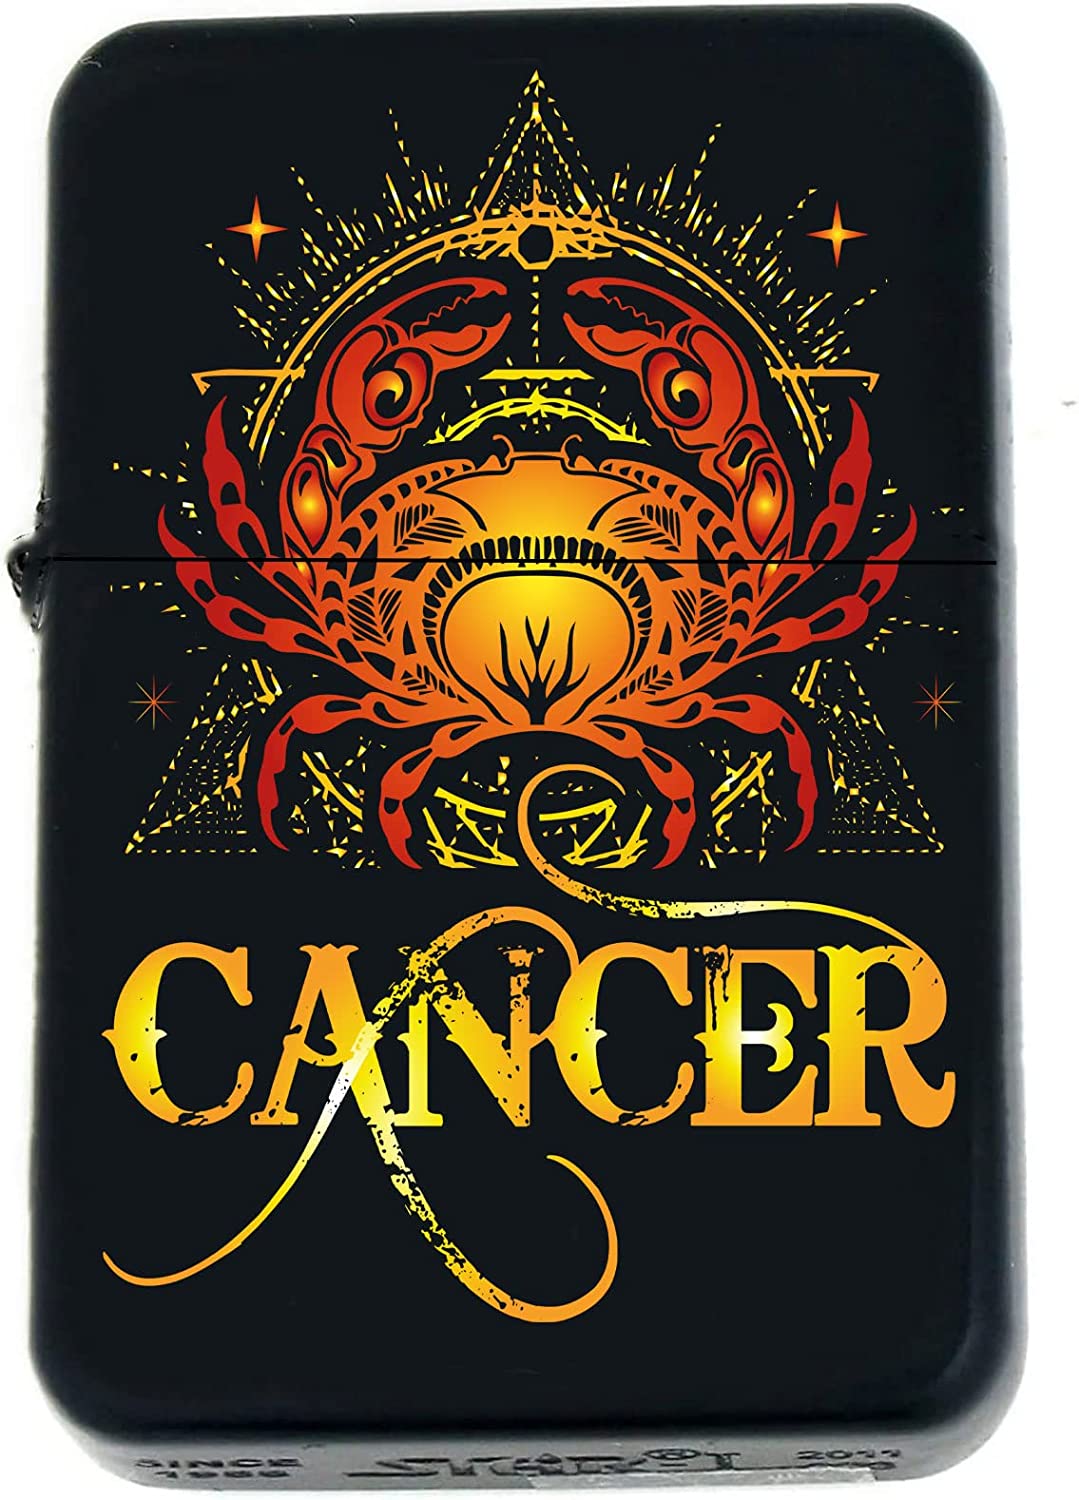 GIFTS INFINITY-Personalized Birthday Zodiac Signs Windproof Lighters-Black Matt (Cancer)